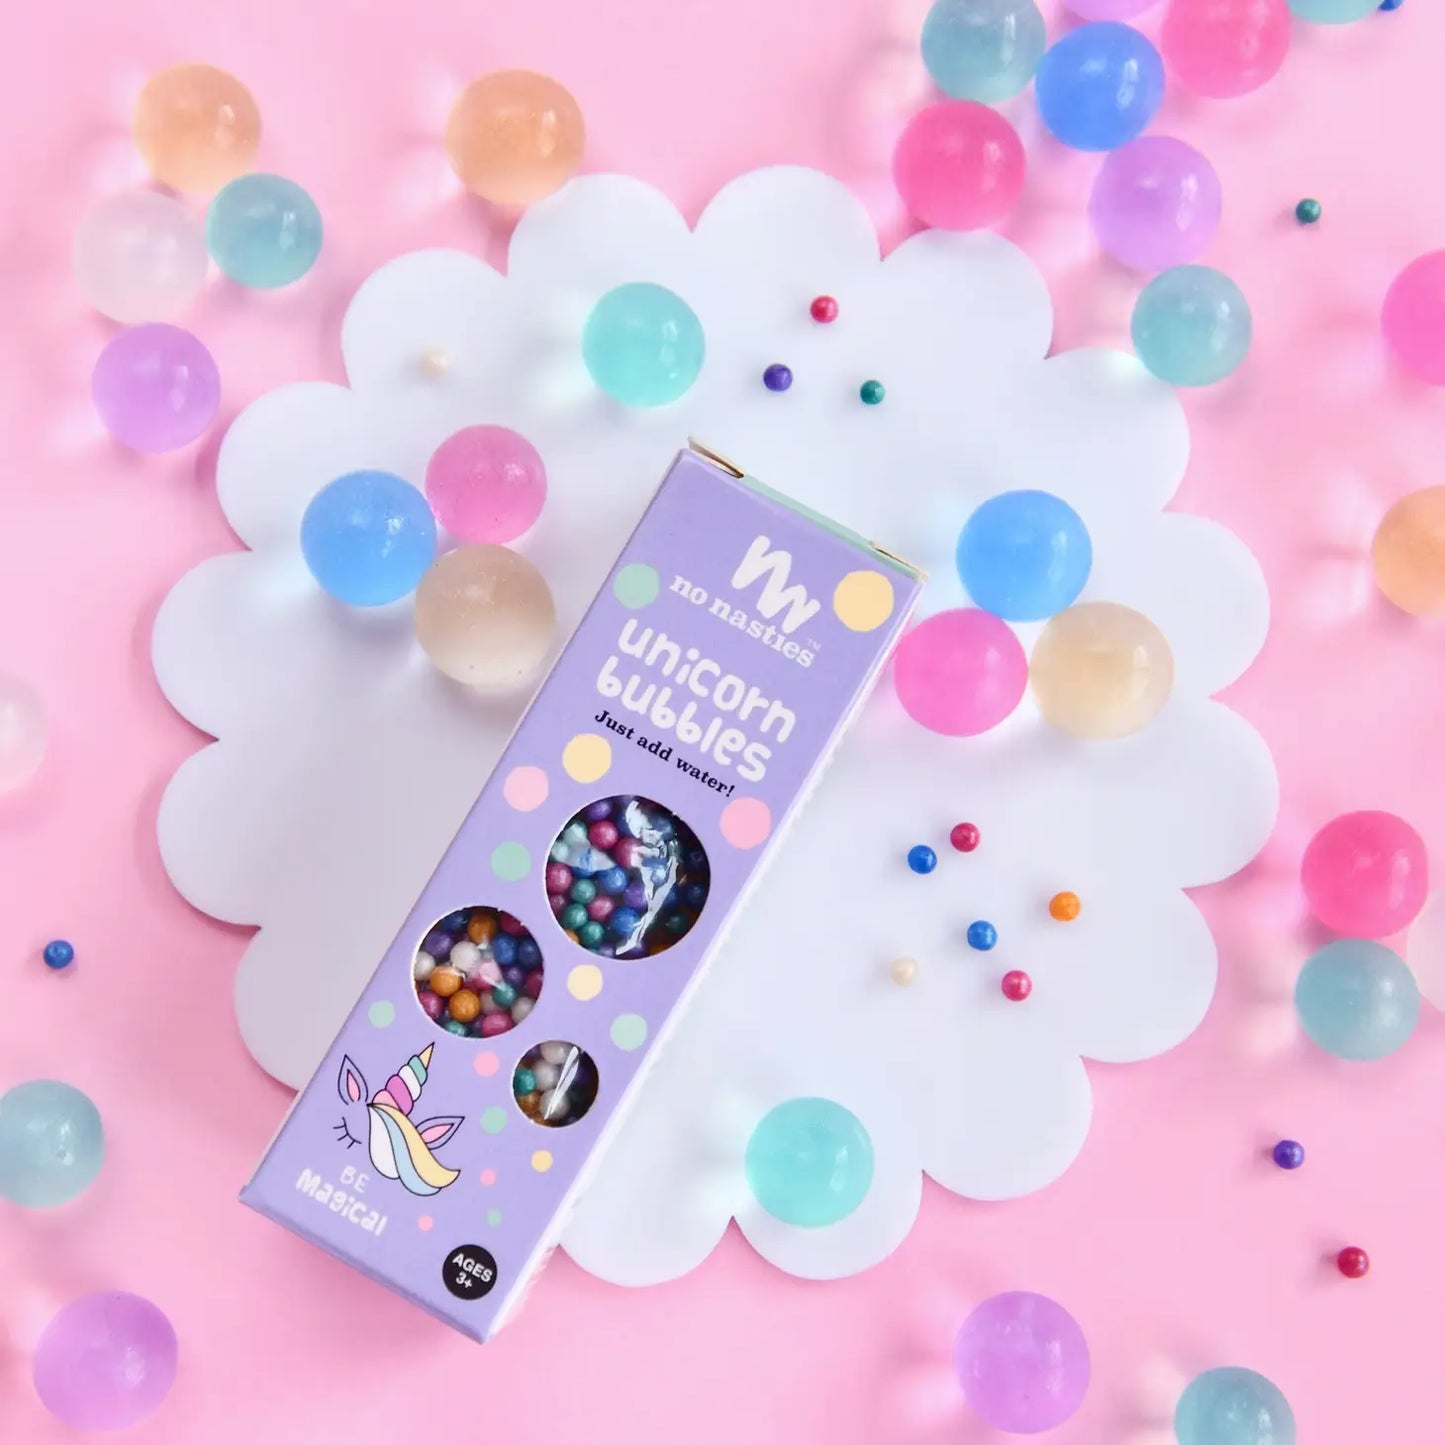 No Nasties Limited Edition Unicorn Biodegradable Water beads